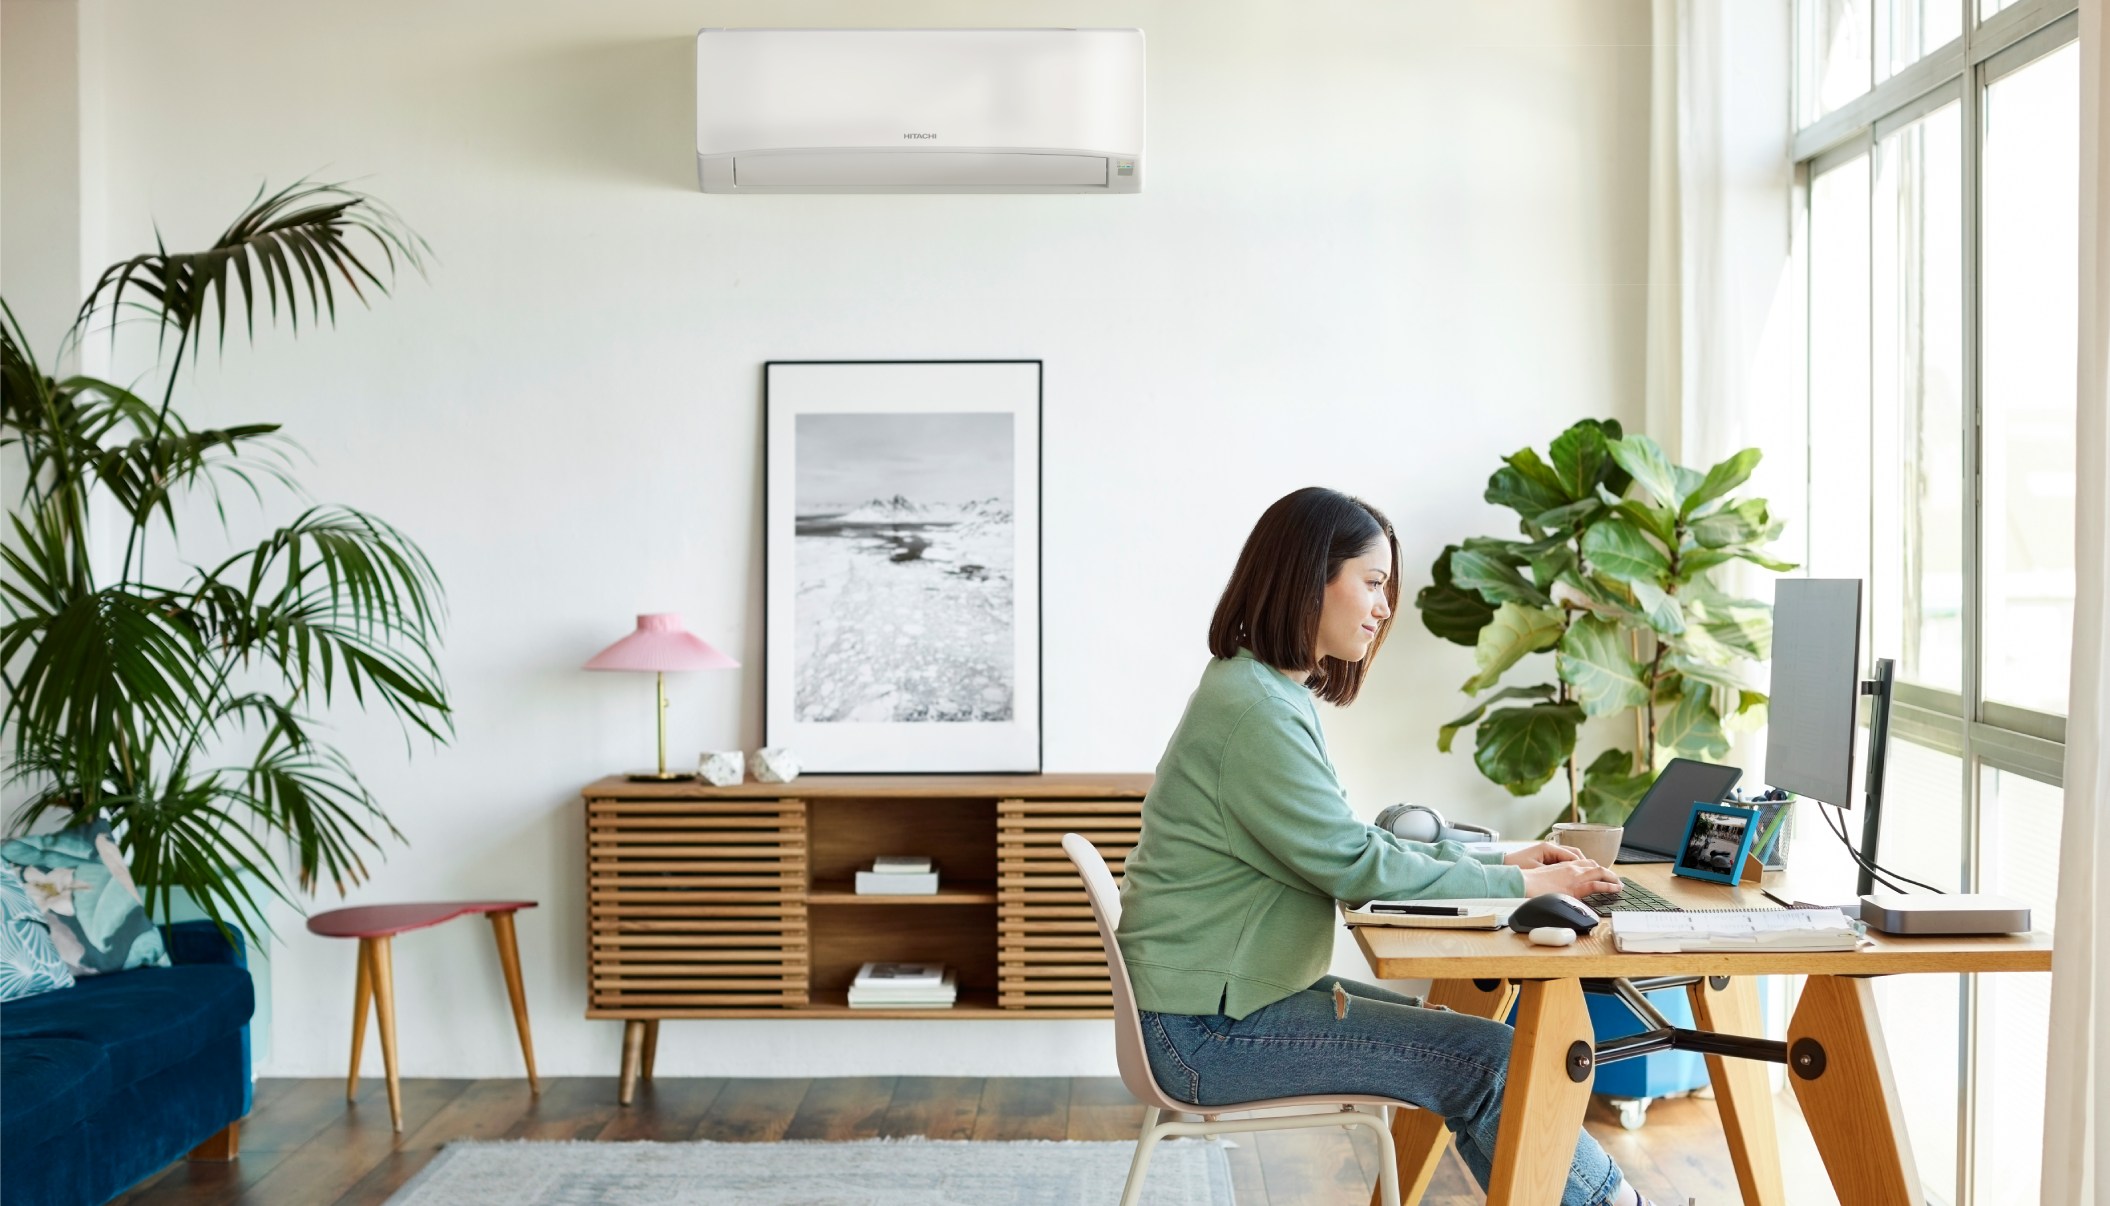 New Hitachi air conditioner airHome launch information